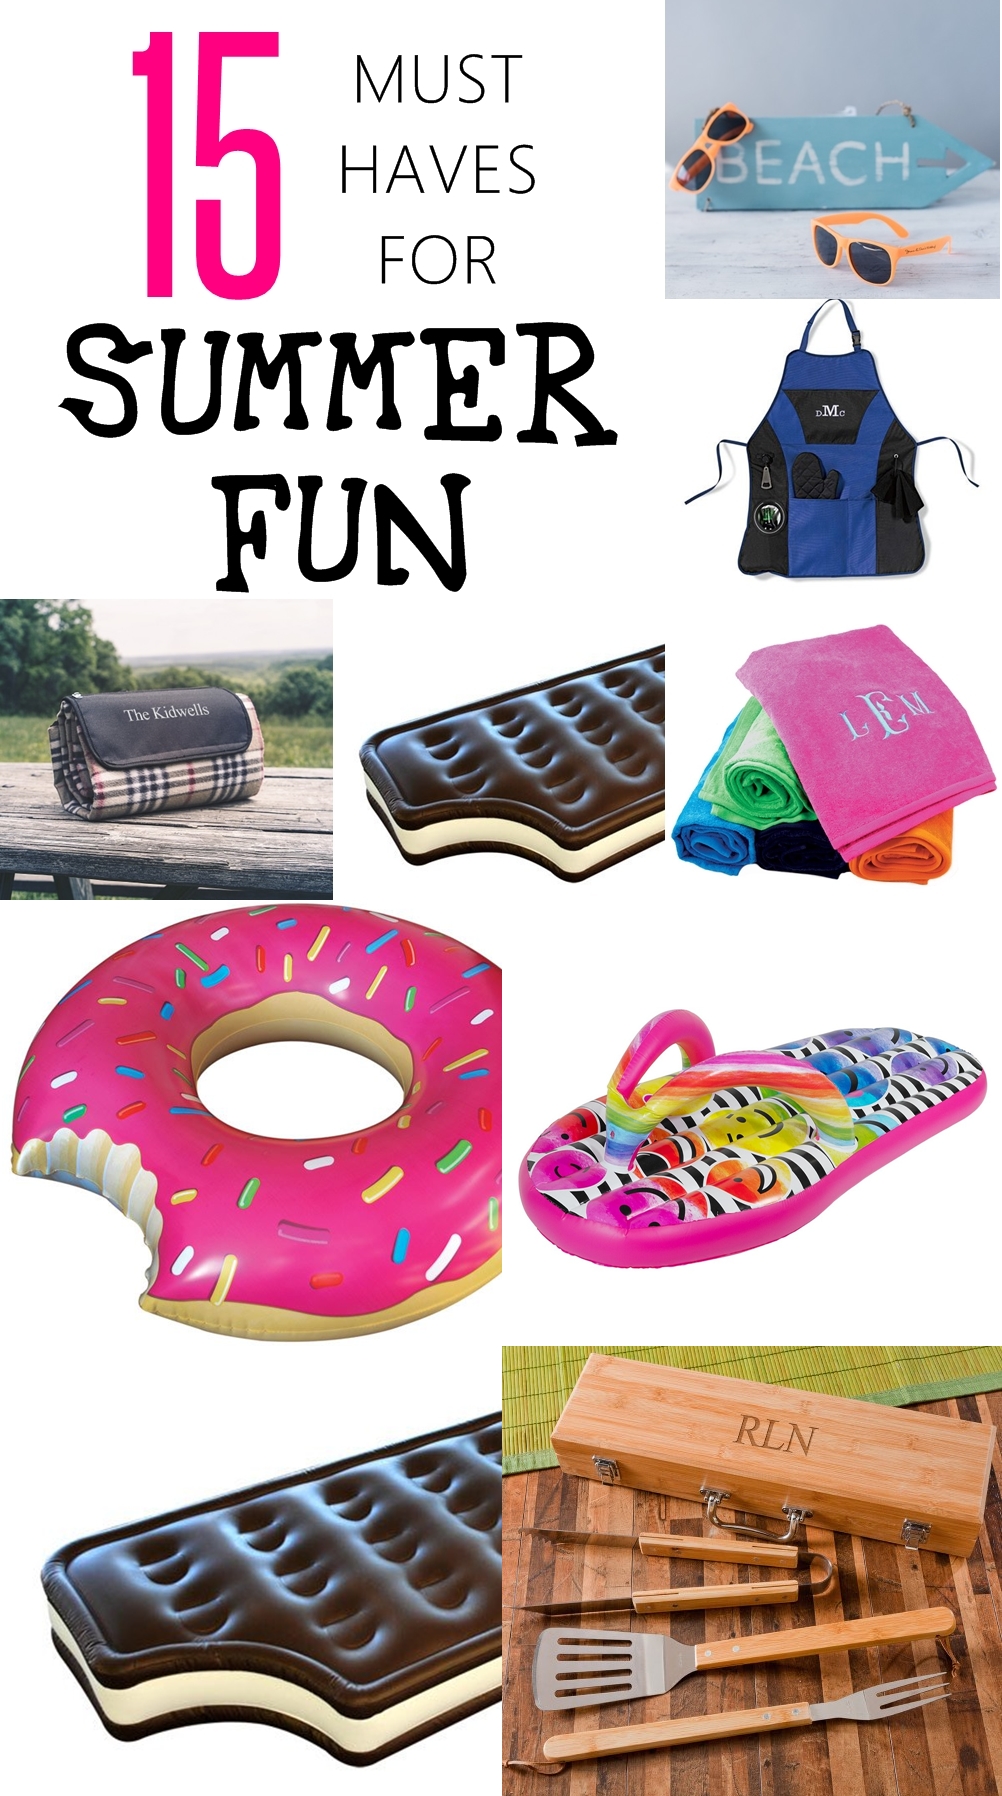 15 Summer Fun Must Haves